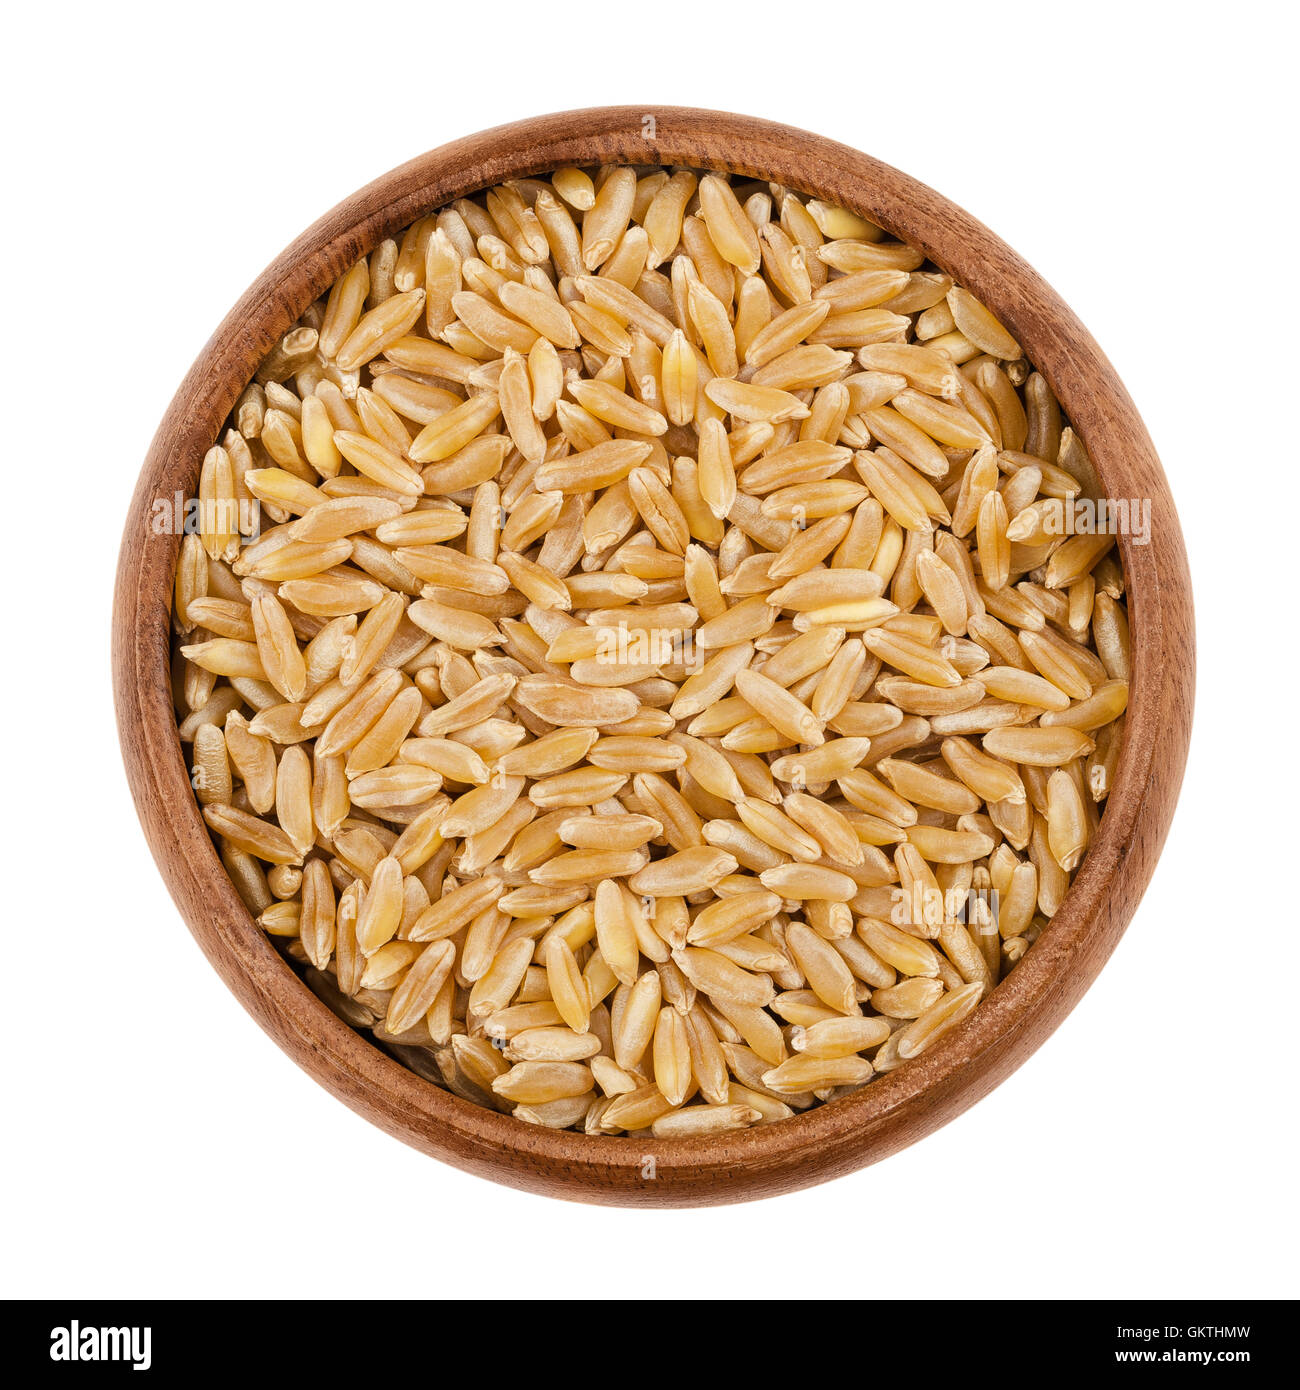 Kamut Khorasan wheat in a wooden bowl on white background. Grains of Oriental wheat, Triticum turanicum. Stock Photo